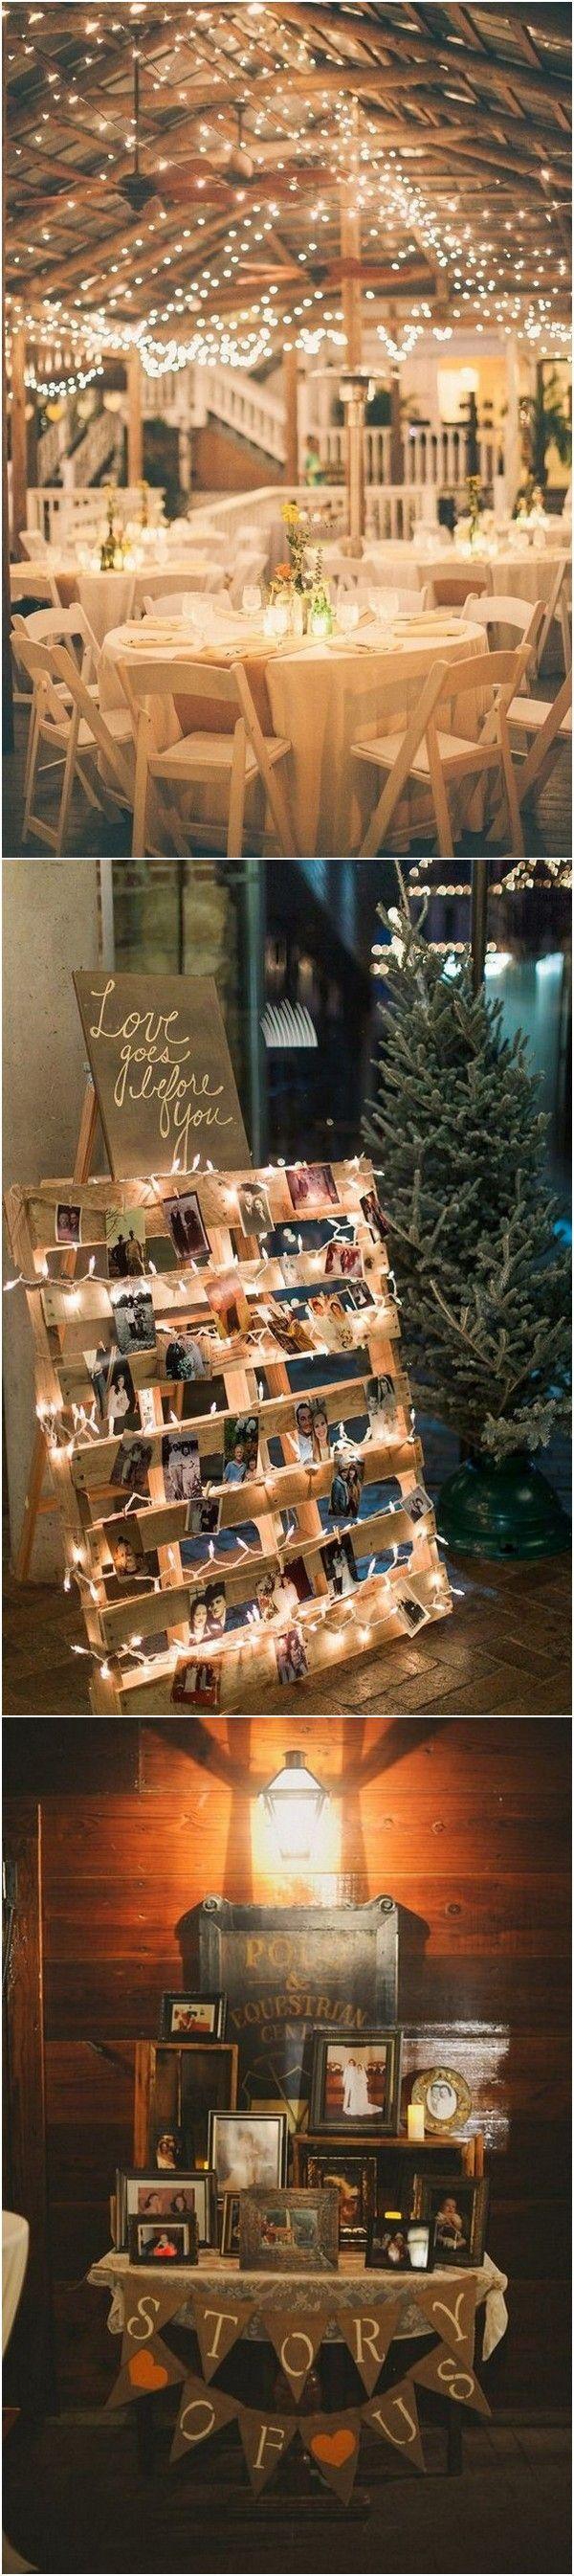 Wedding - 18 Perfect Country Rustic Barn Wedding Decoration Ideas - Page 3 Of 3